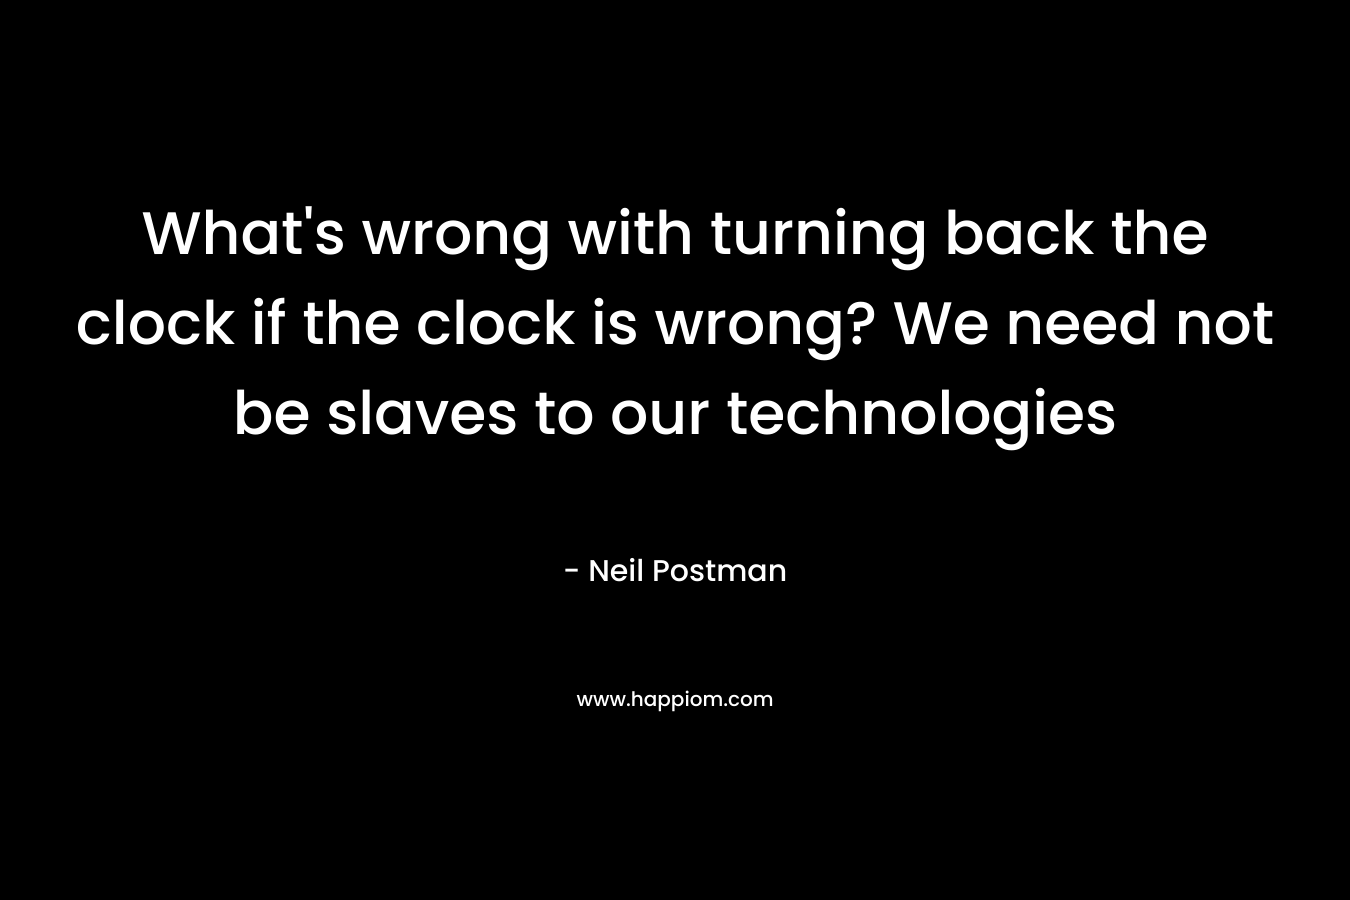 What’s wrong with turning back the clock if the clock is wrong? We need not be slaves to our technologies – Neil Postman